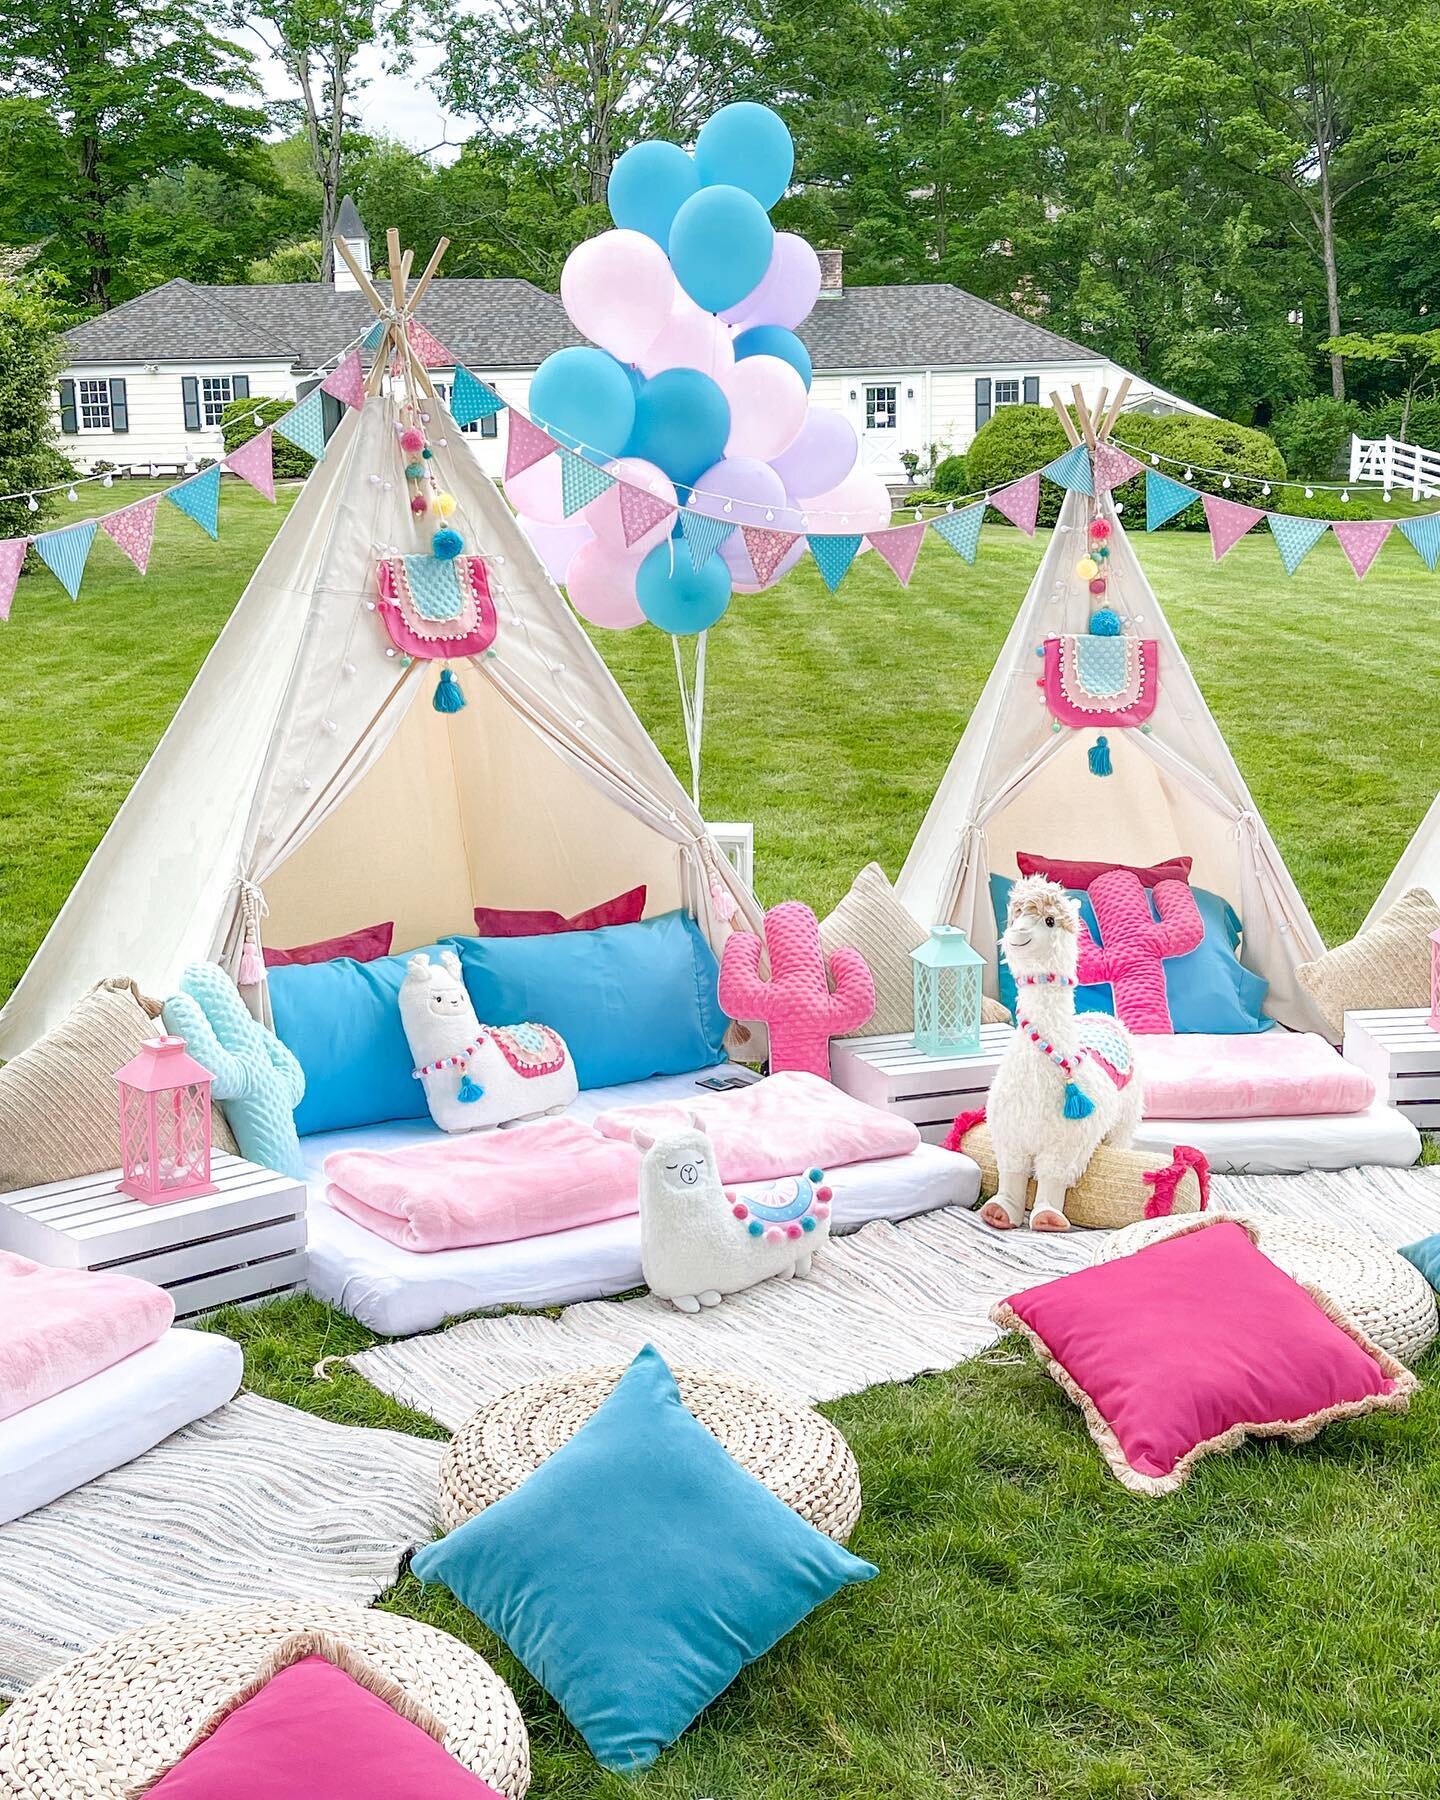 A fun llama-themed birthday party! 🦙 All the details of this cozy and comfy lounge area set up for an amazing movie night! 
Let the fun come to you! 
Event planning &amp; Party rentals 
We set up &amp; break down.